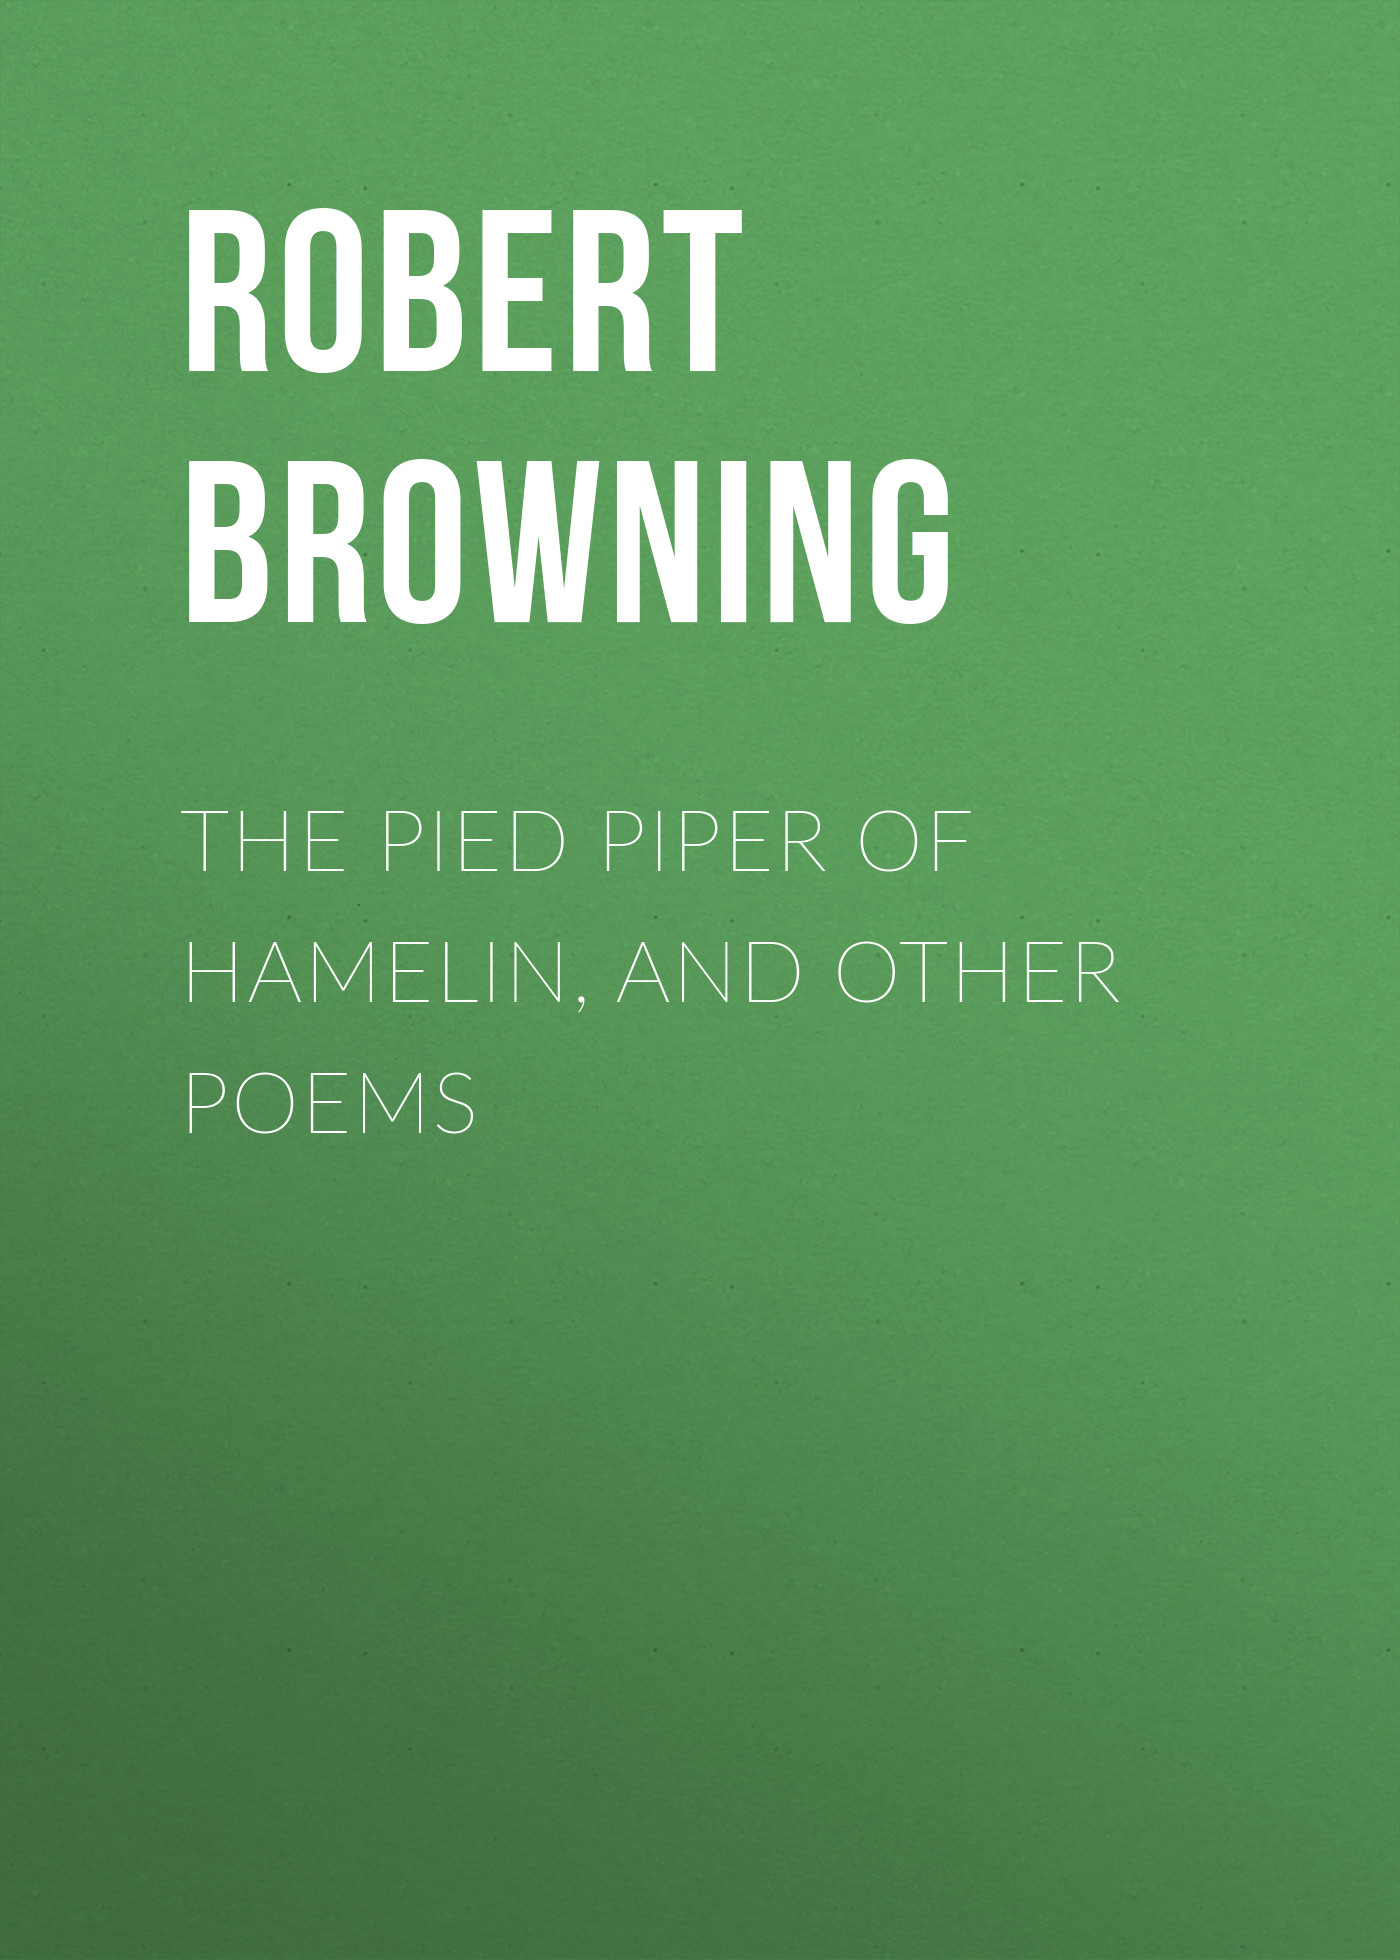 Robert Browning The Pied Piper of Hamelin, and Other Poems